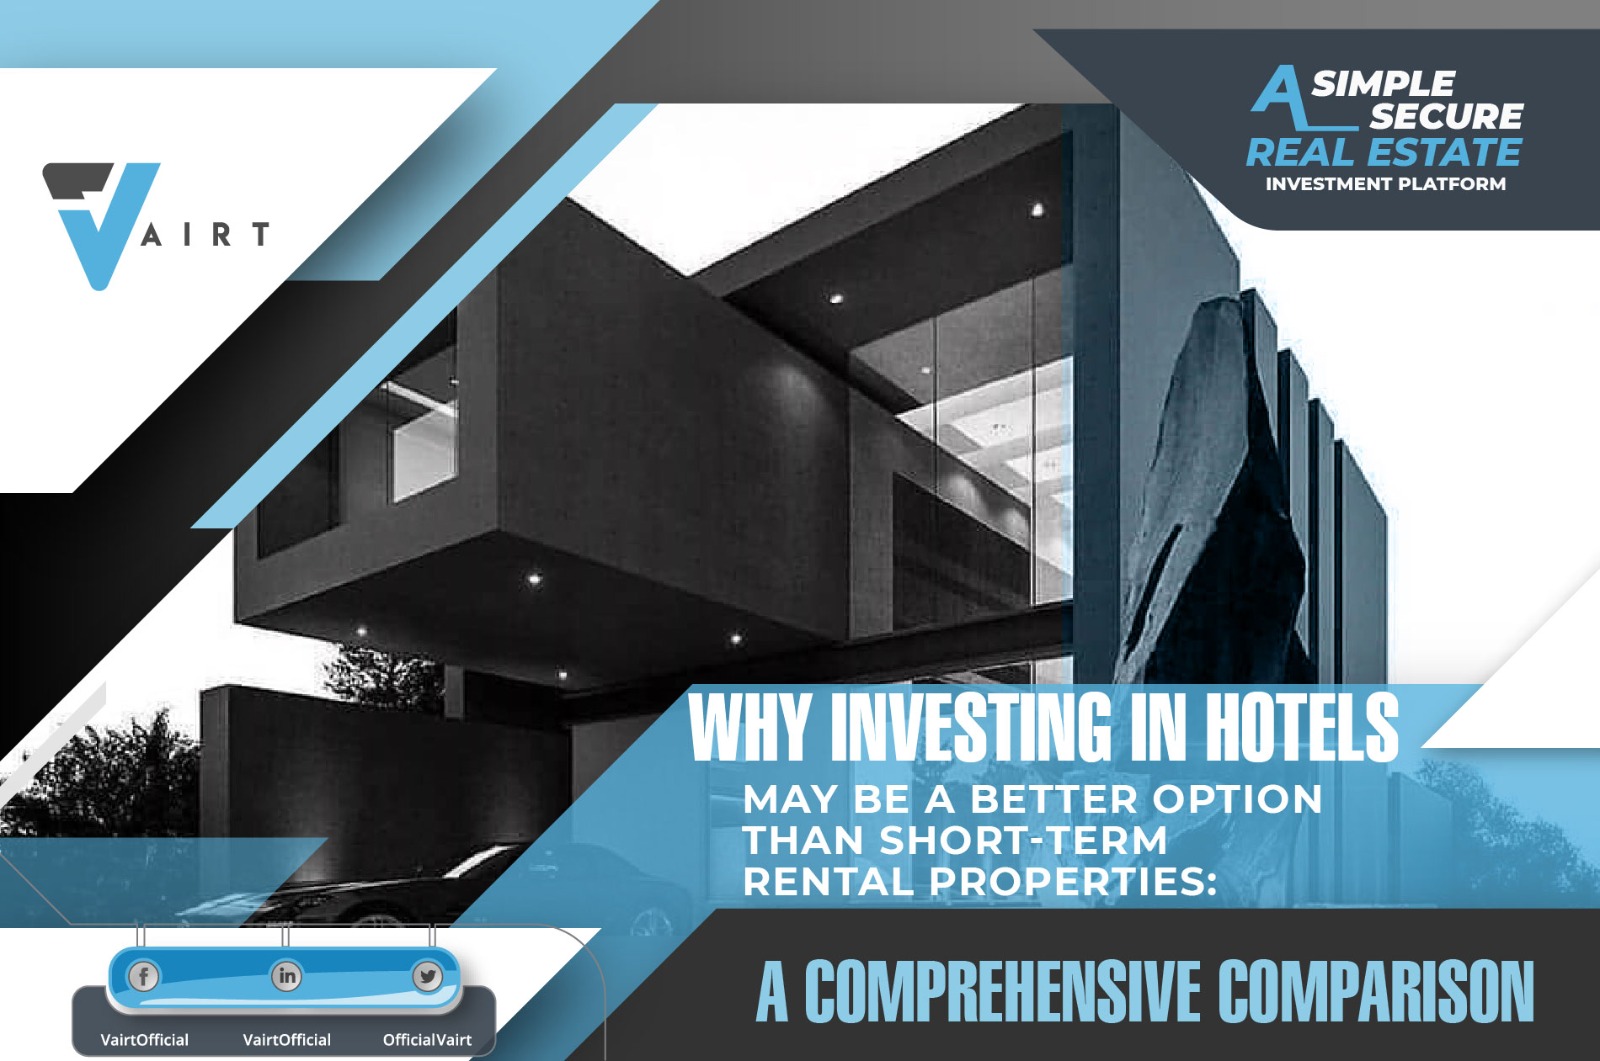 Why Investing in Hotels May Be a Better Option Than Short-Term Rental Properties